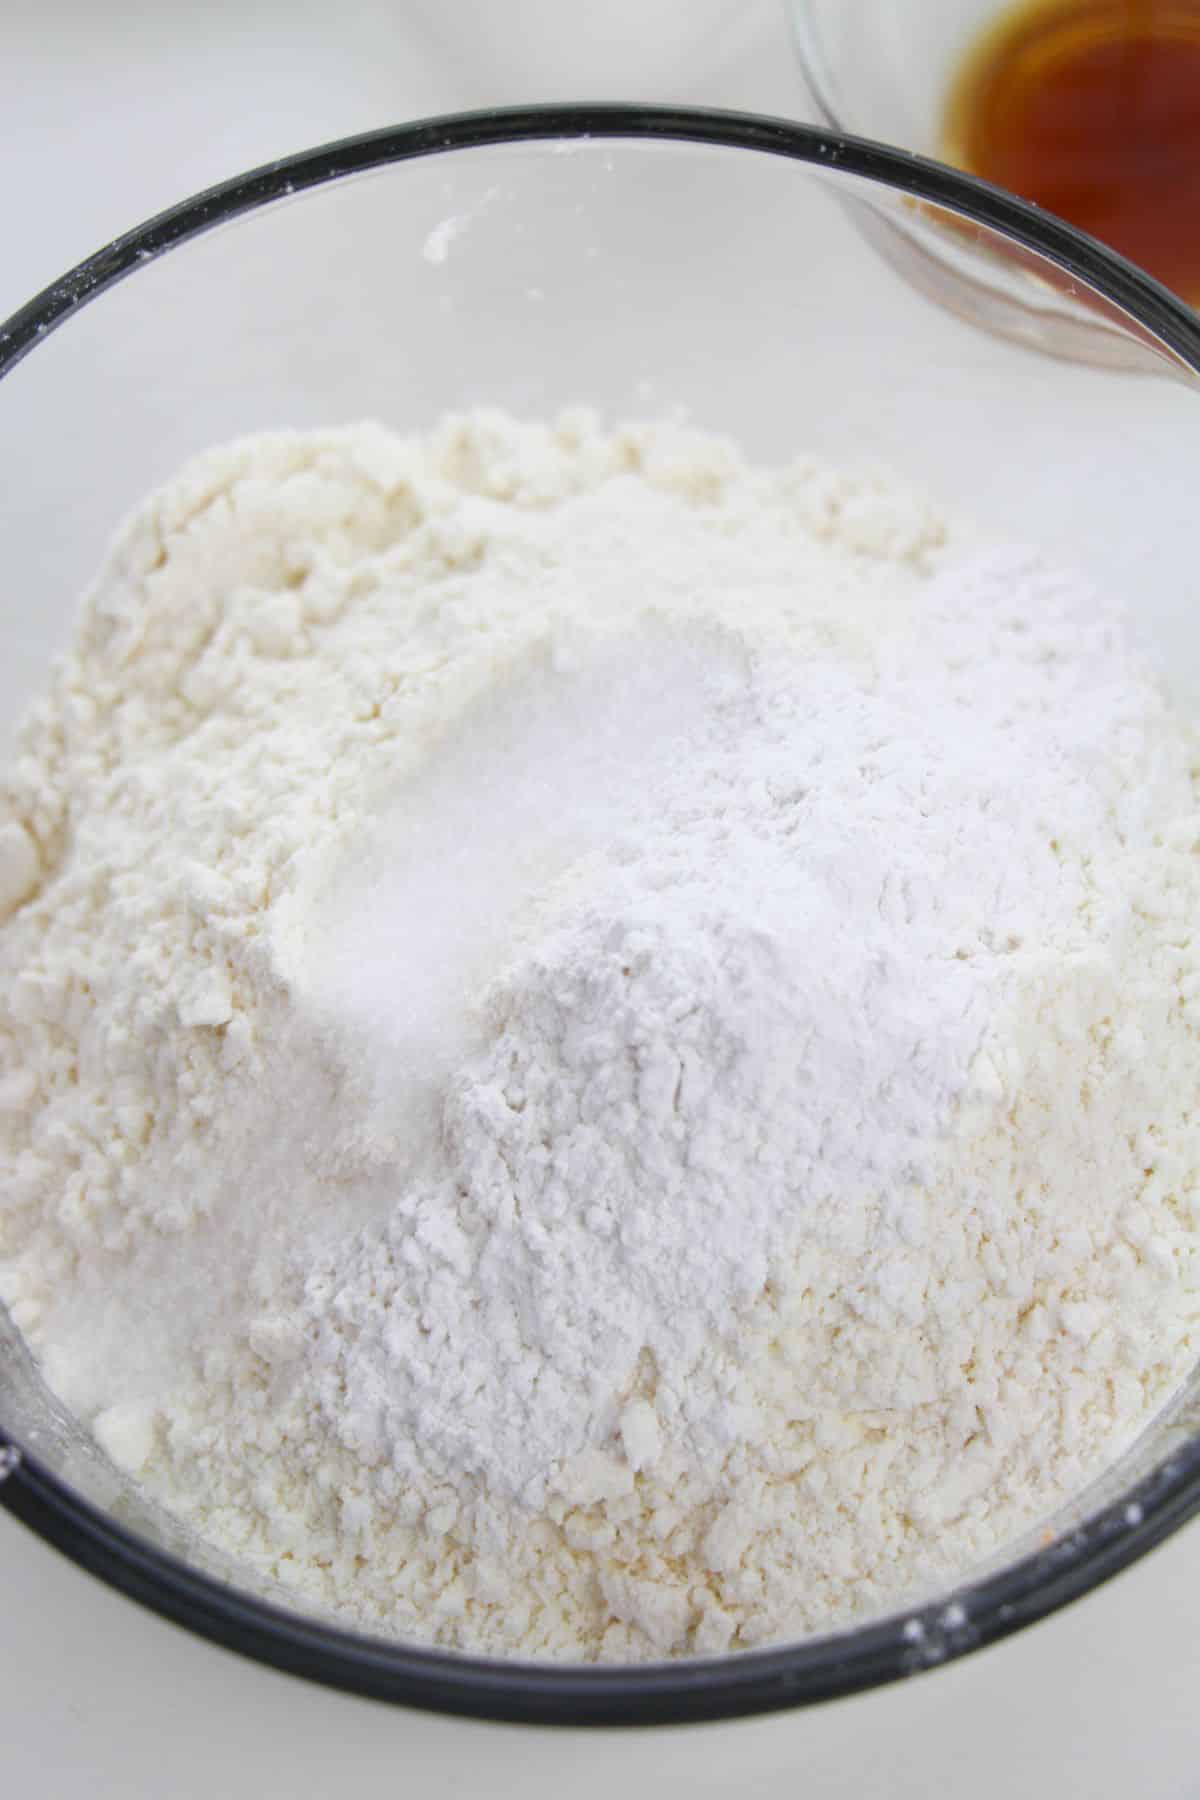 Flour, baking powder and salt in a small glass bowl